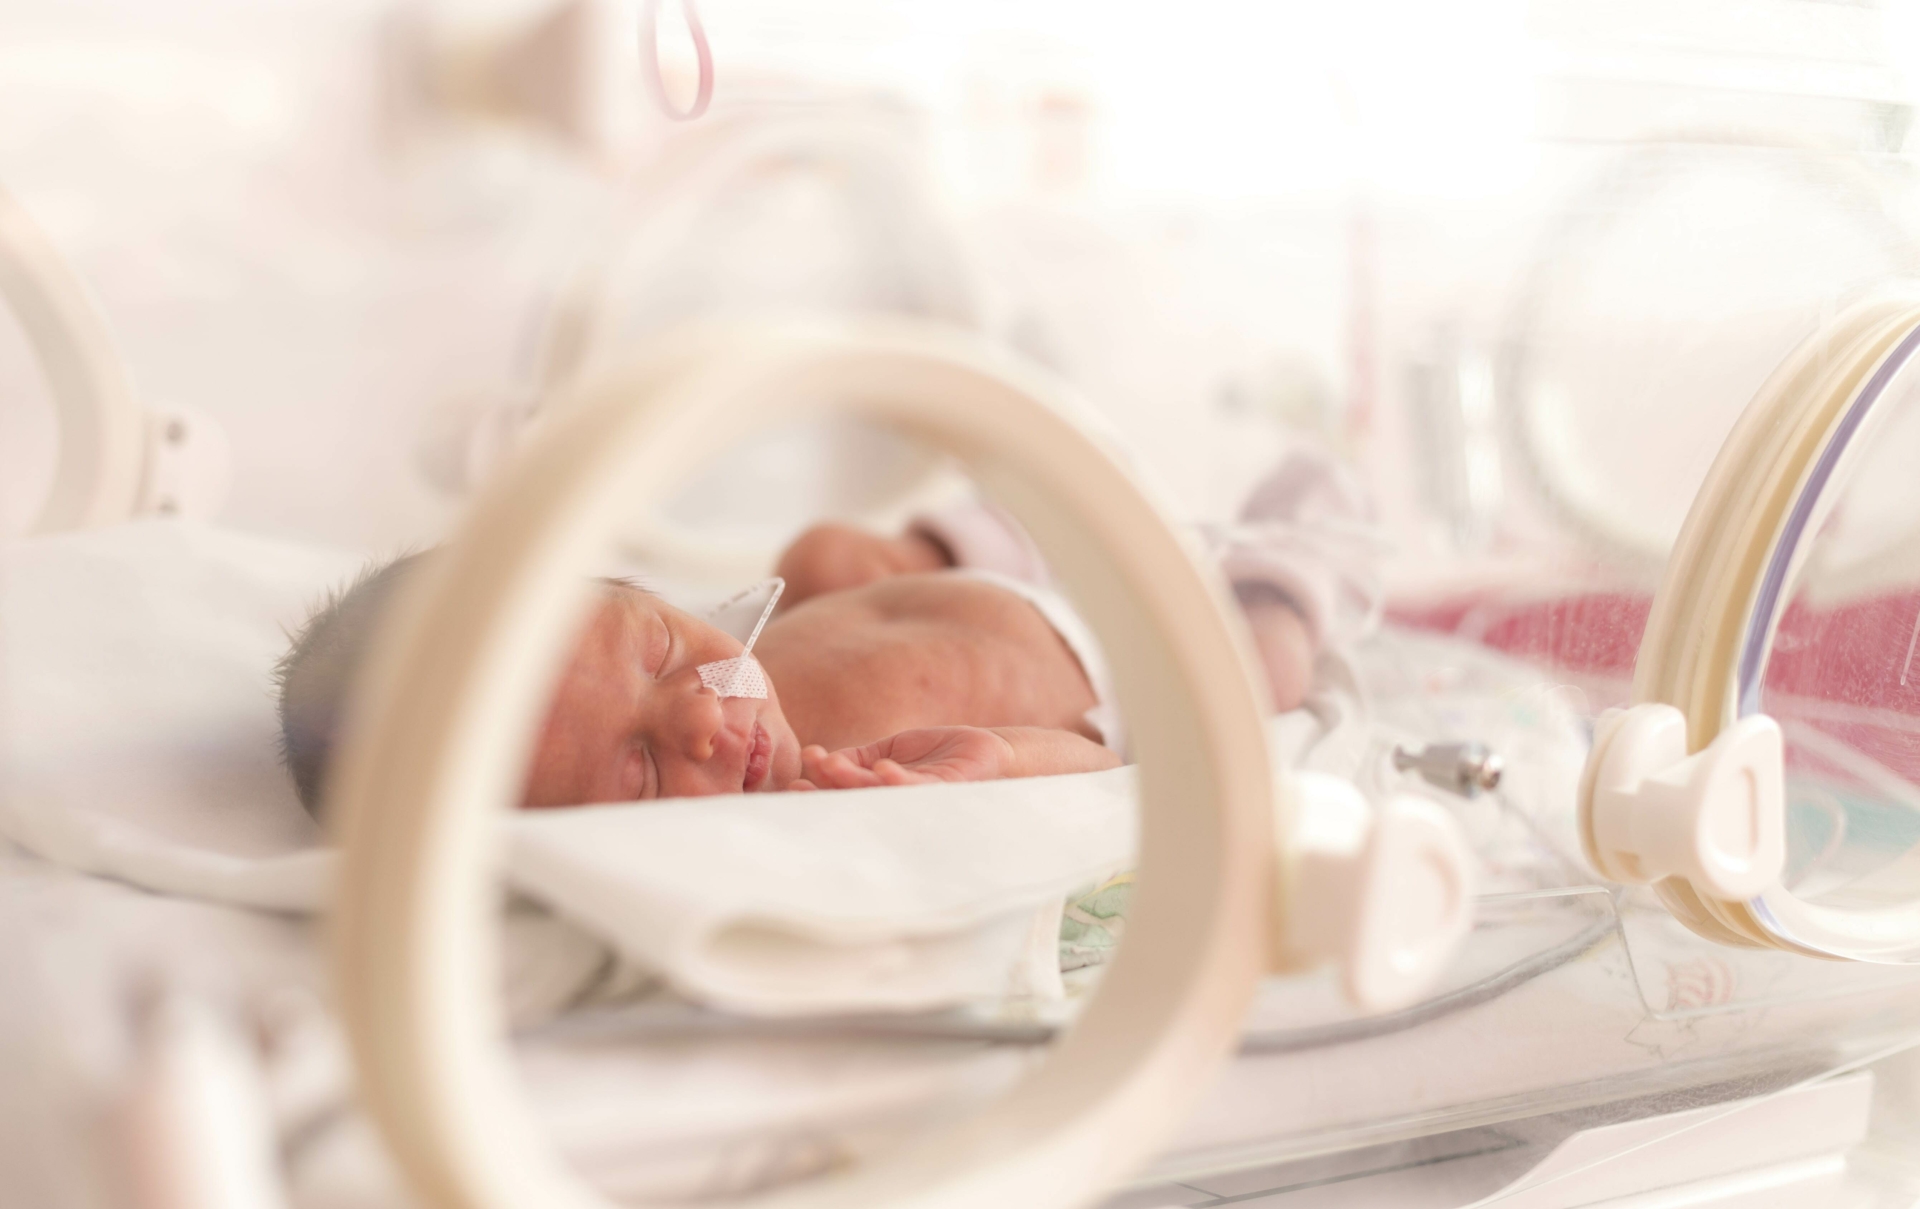 Funding a better future for preterm babies